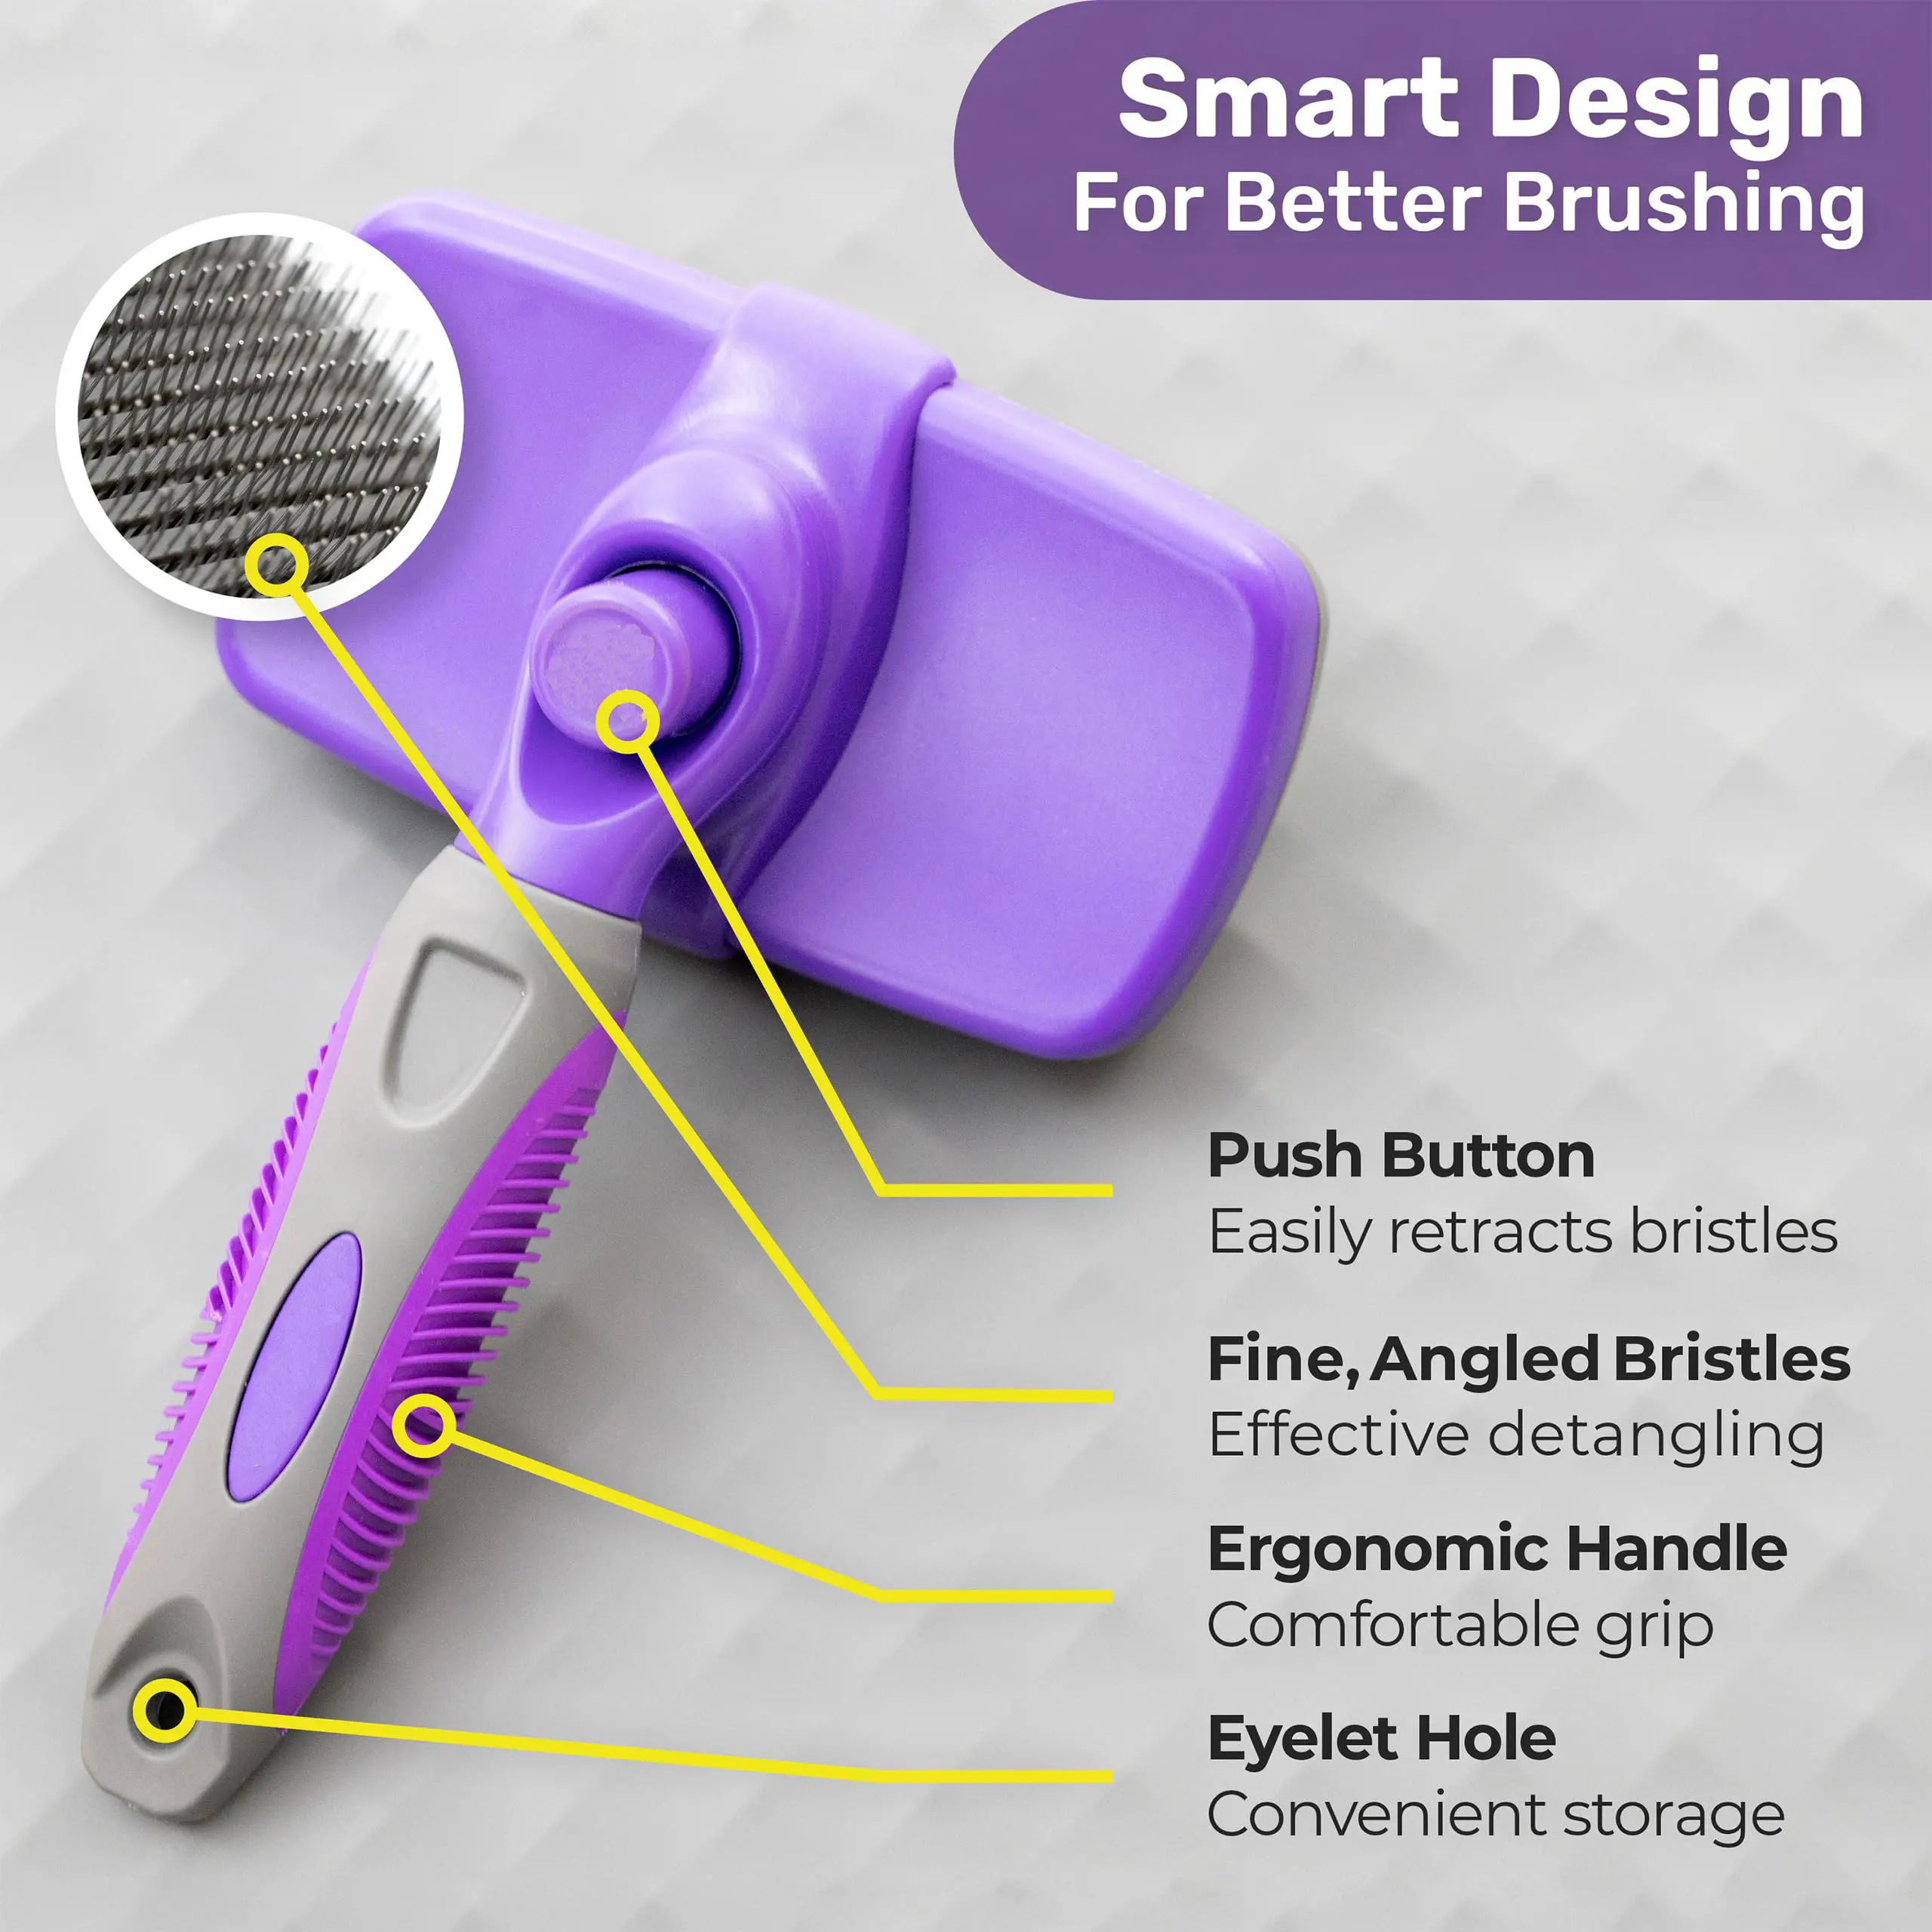 BEST Selling Self-Cleaning Slicker Brush Pets OEM/ODM Stainless Steel A mazon's Favourite Pet Grooming Product